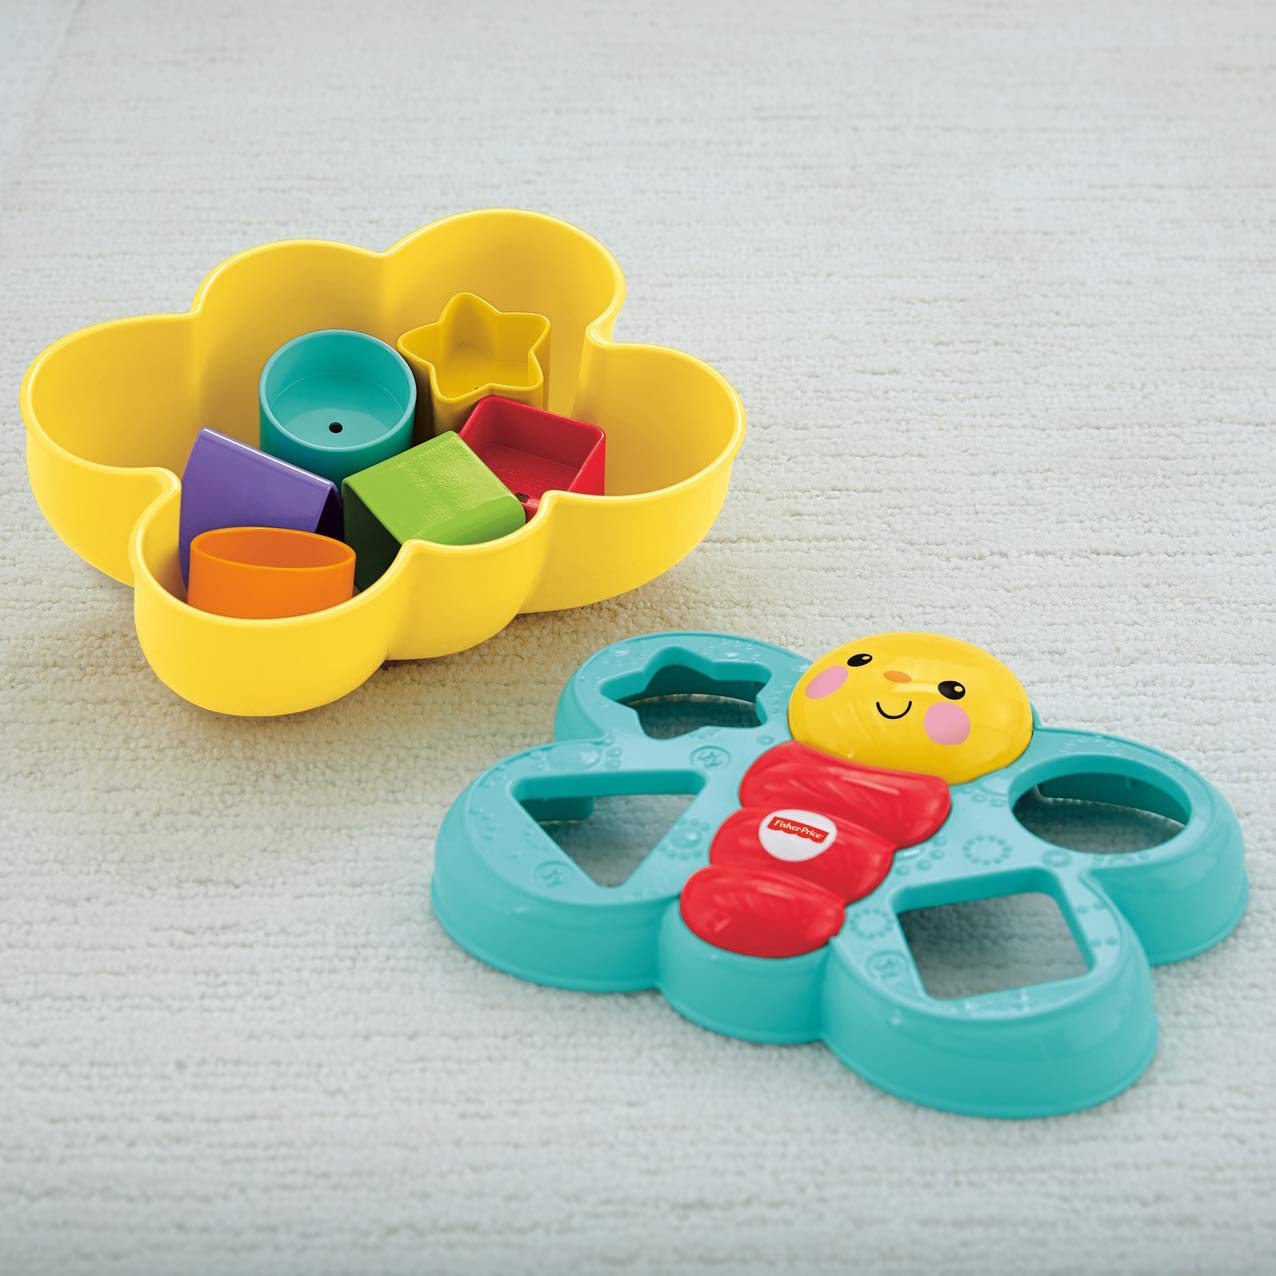 Butterfly Shape Sorter | Fisher-Price